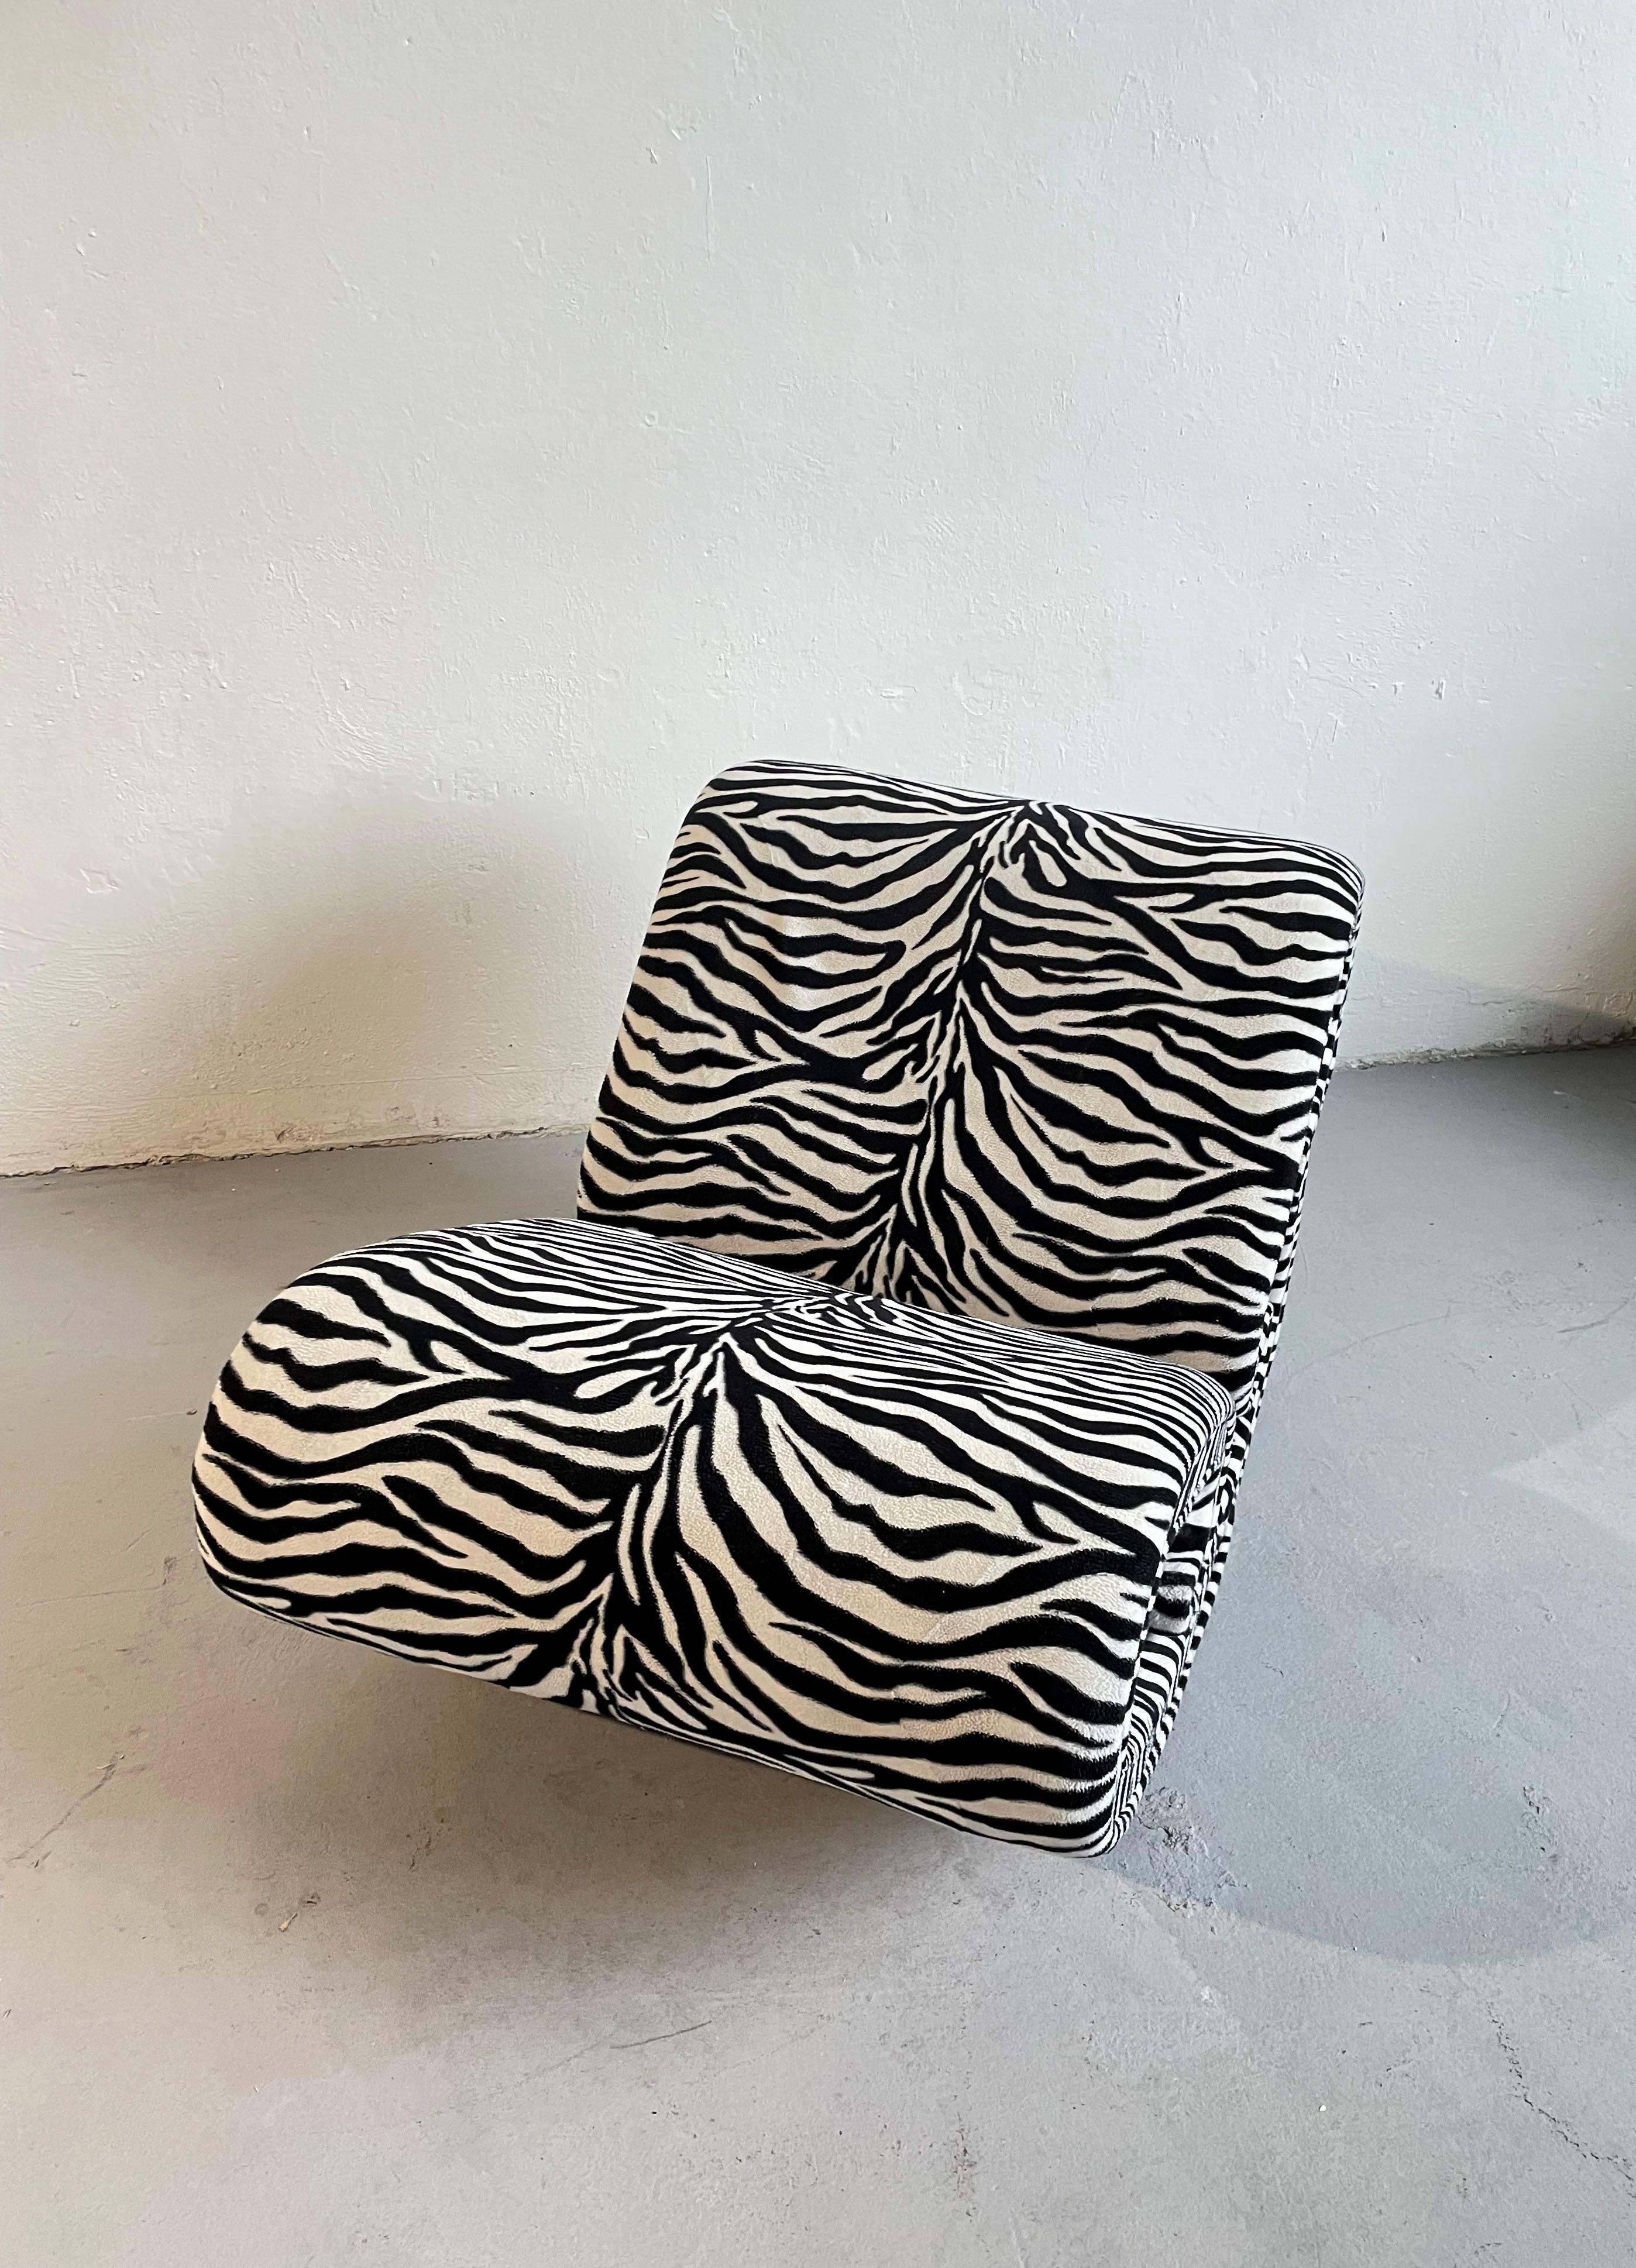 Vintage Sculptural Organic Shape Lounge Chair in Zebra Fabric, C1970s For Sale 2